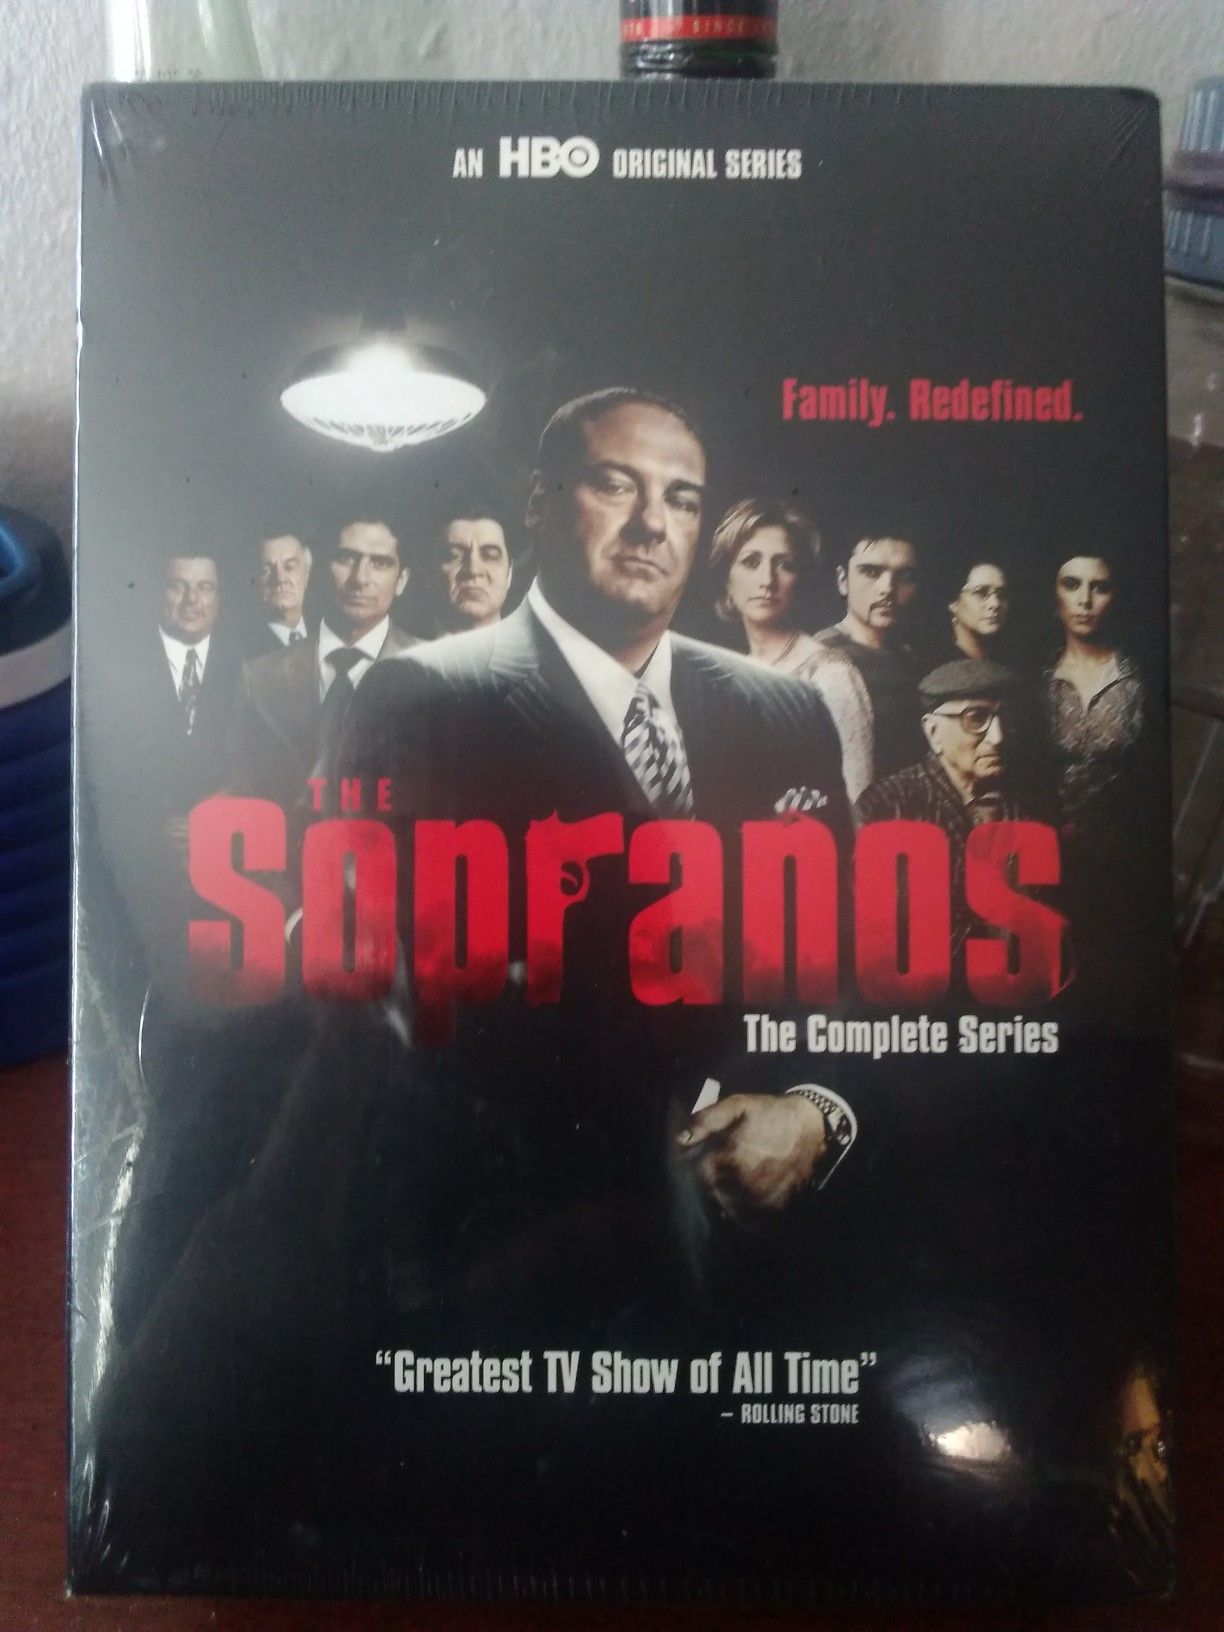 Sopranos the complete series(New) - Make Offer